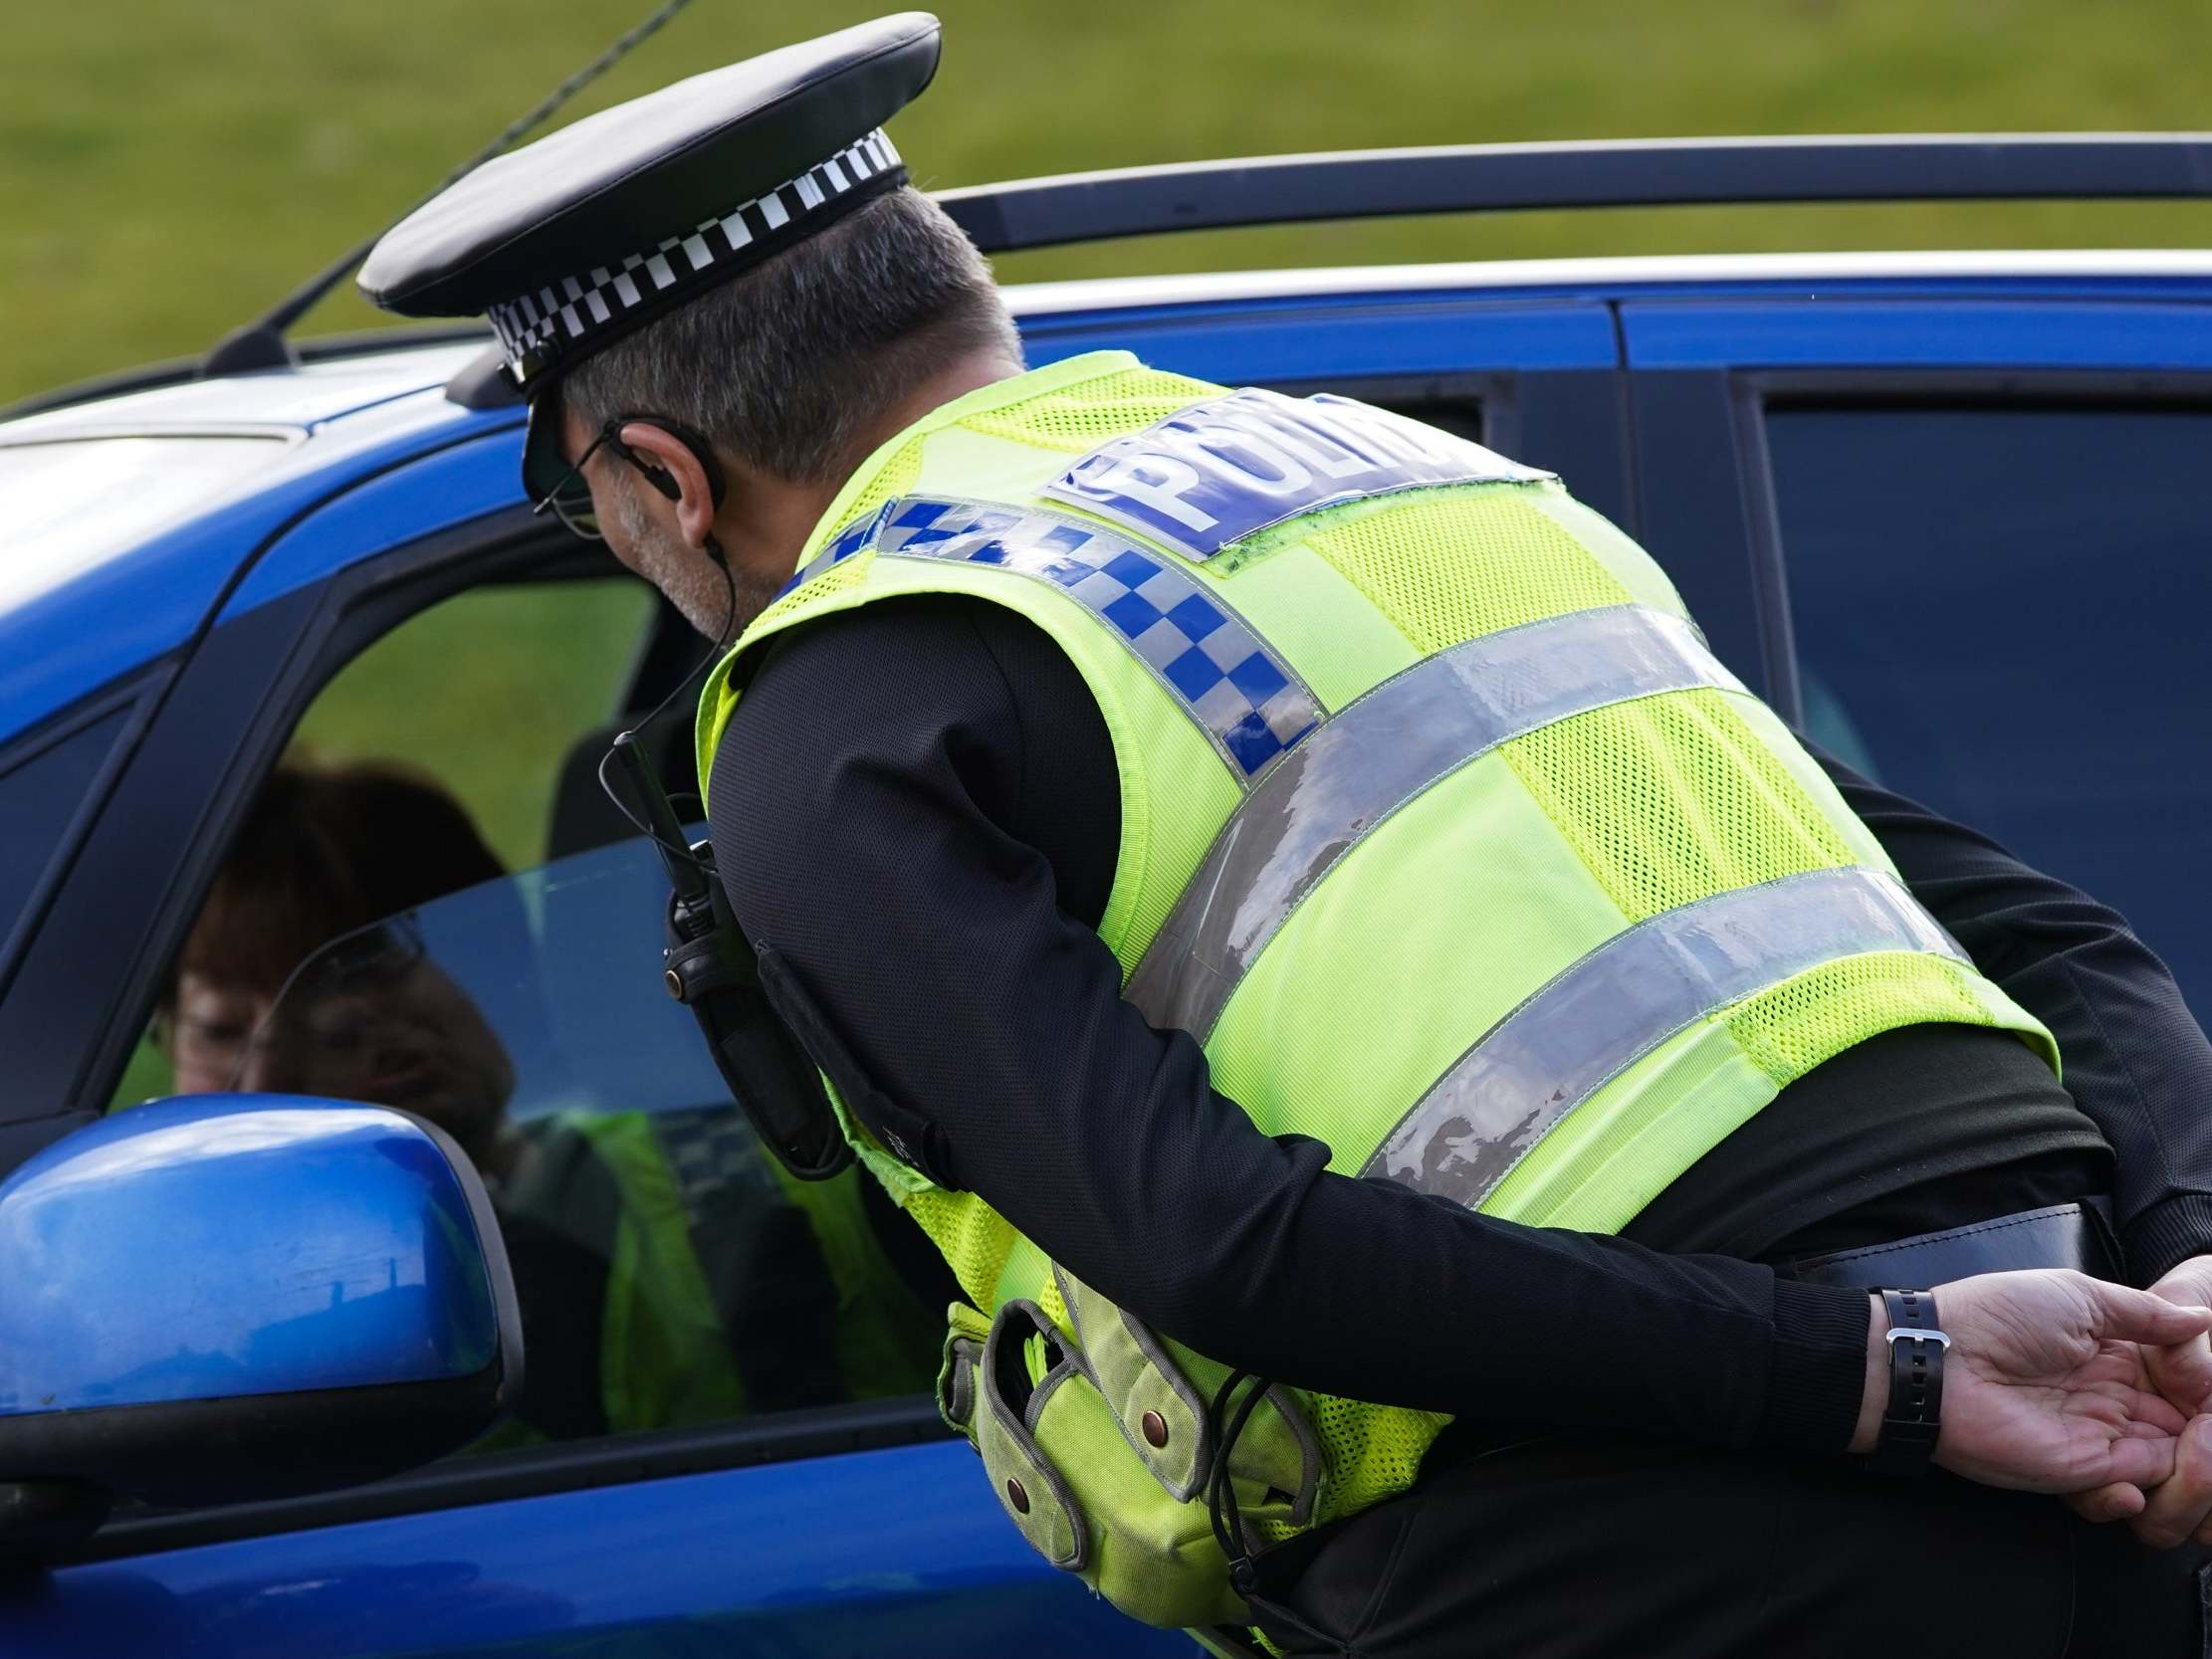 North Yorkshire Police officer reinforces the importance of social distancing and staying at home at a vehicle stop